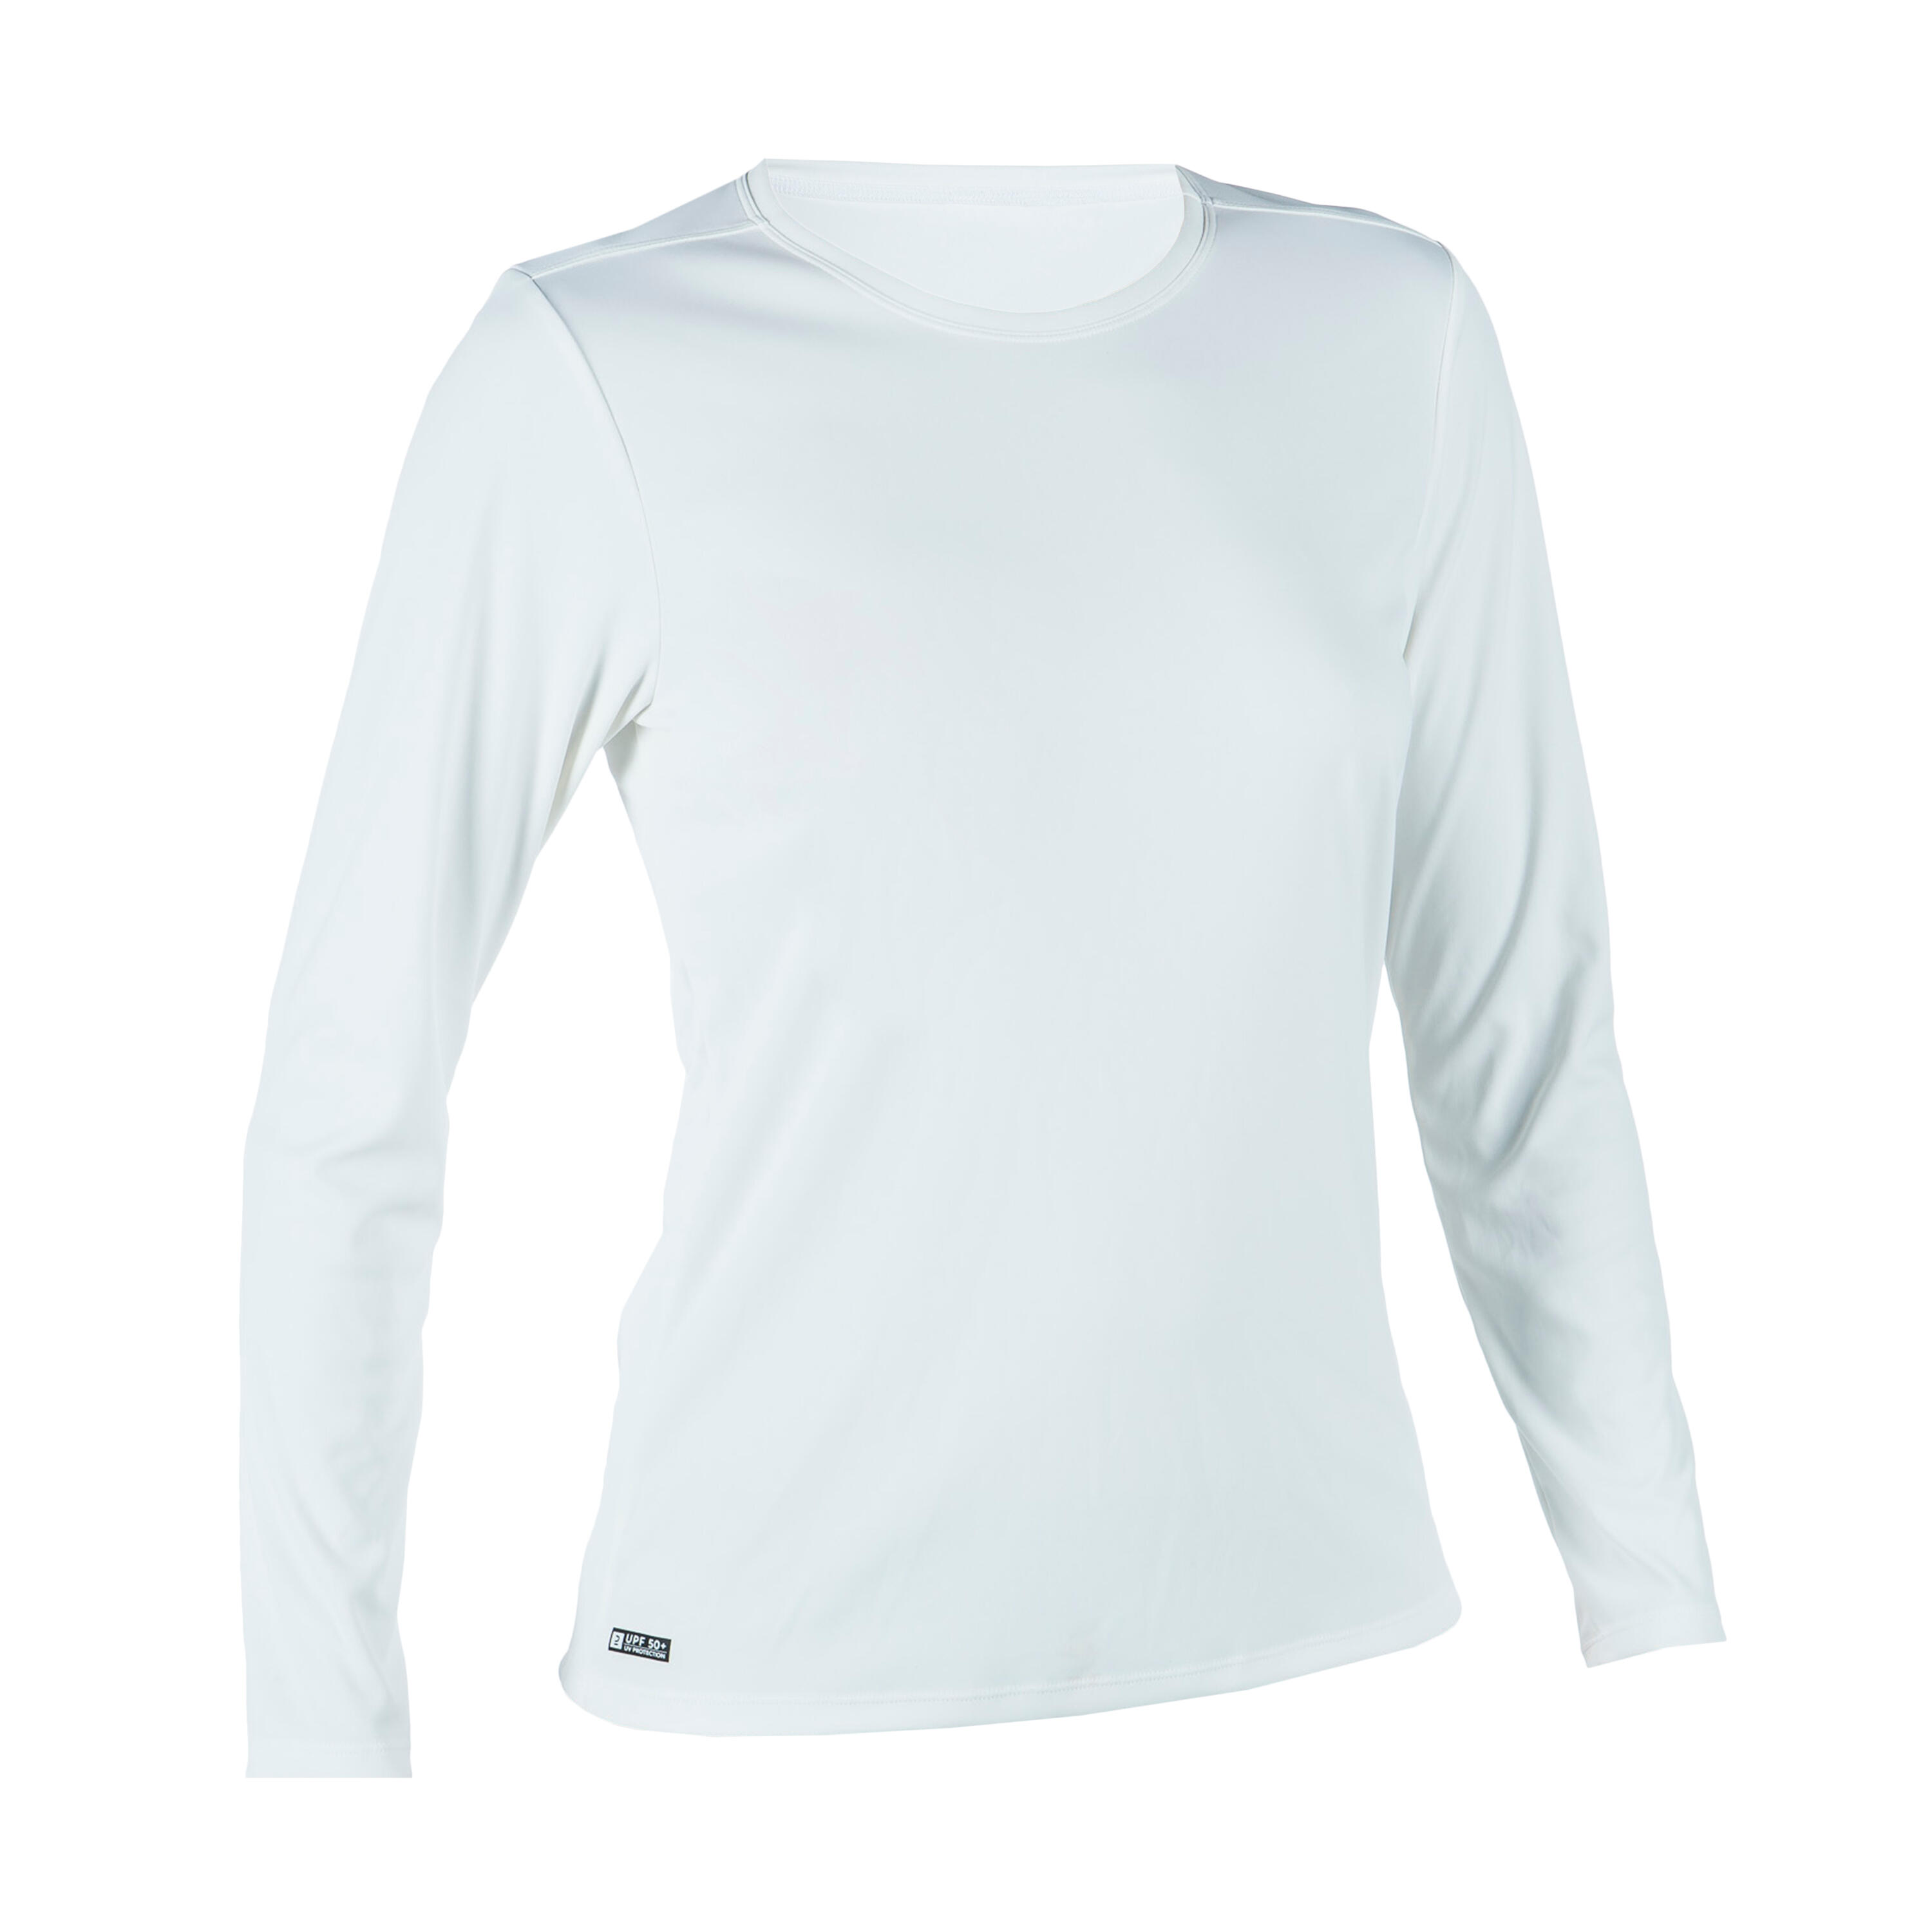 WOMEN’S SURFING LONG-SLEEVED UV-RESISTANT T-SHIRT MALOU GREIGE (UNDYED) 3/11